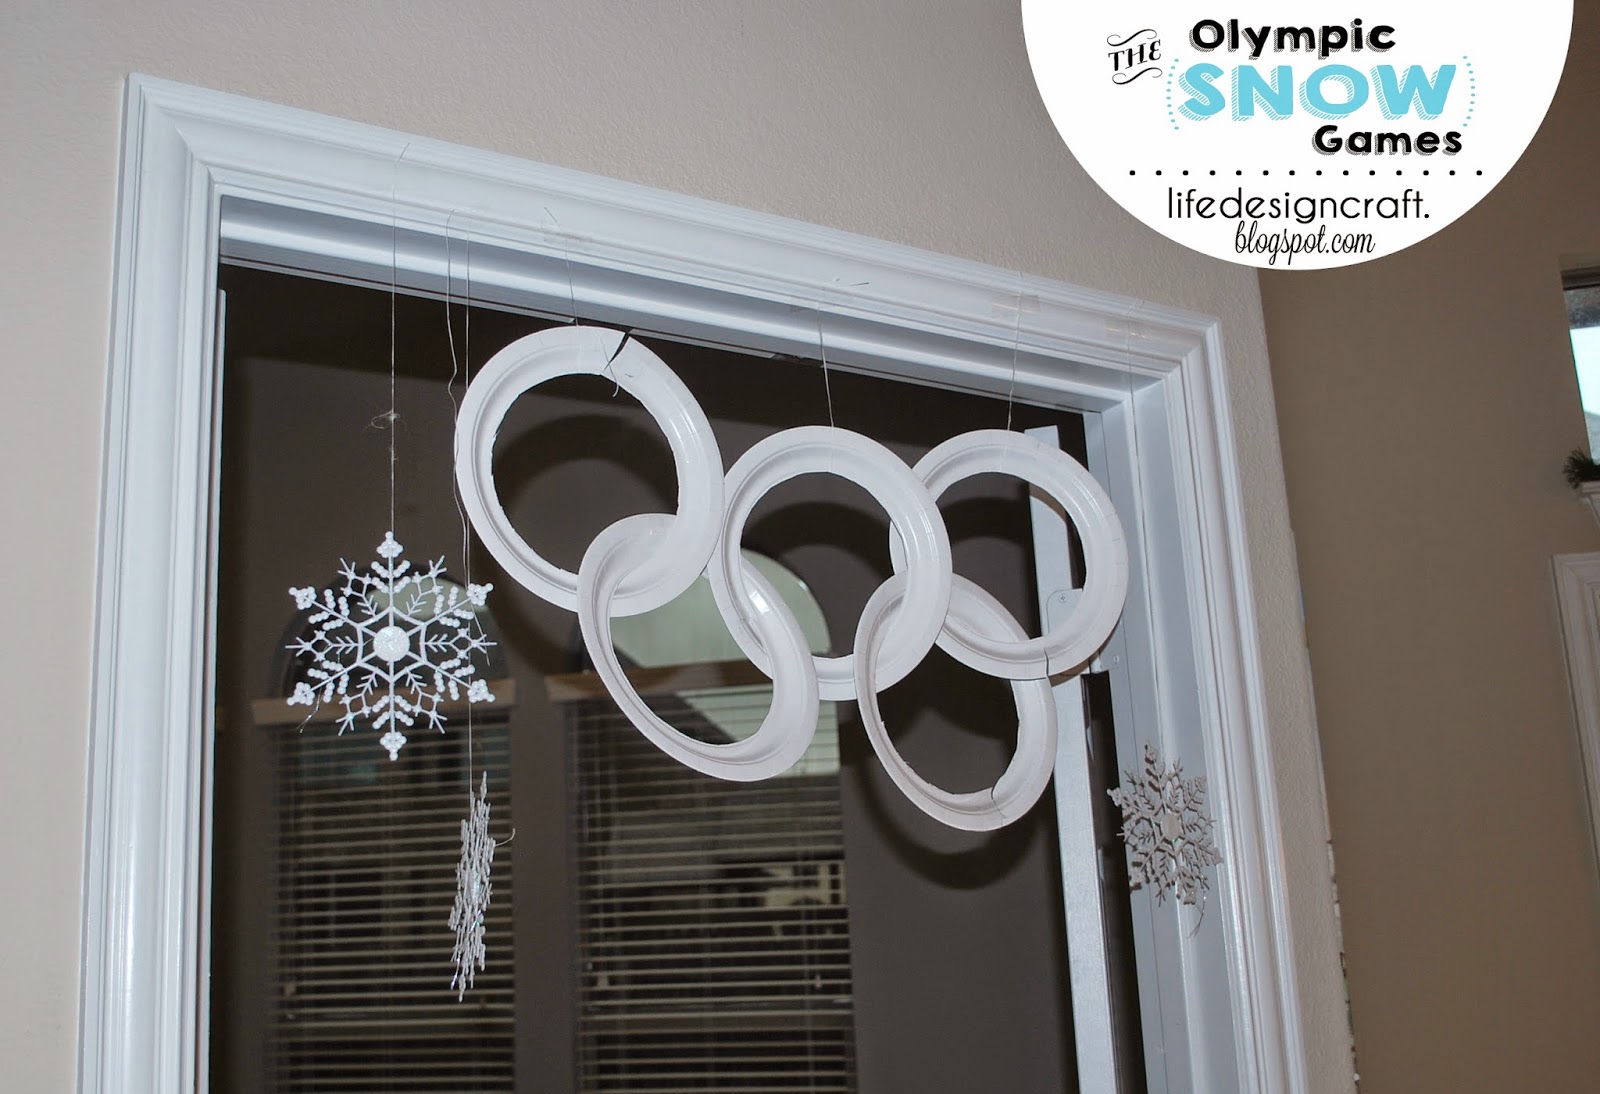 The Olympic Snow Games - interactive family game for the holidays, winter break, or the next time your family is "snowed in". This lil' family event will have you all laughing, cheering, and having "snow" much fun together!